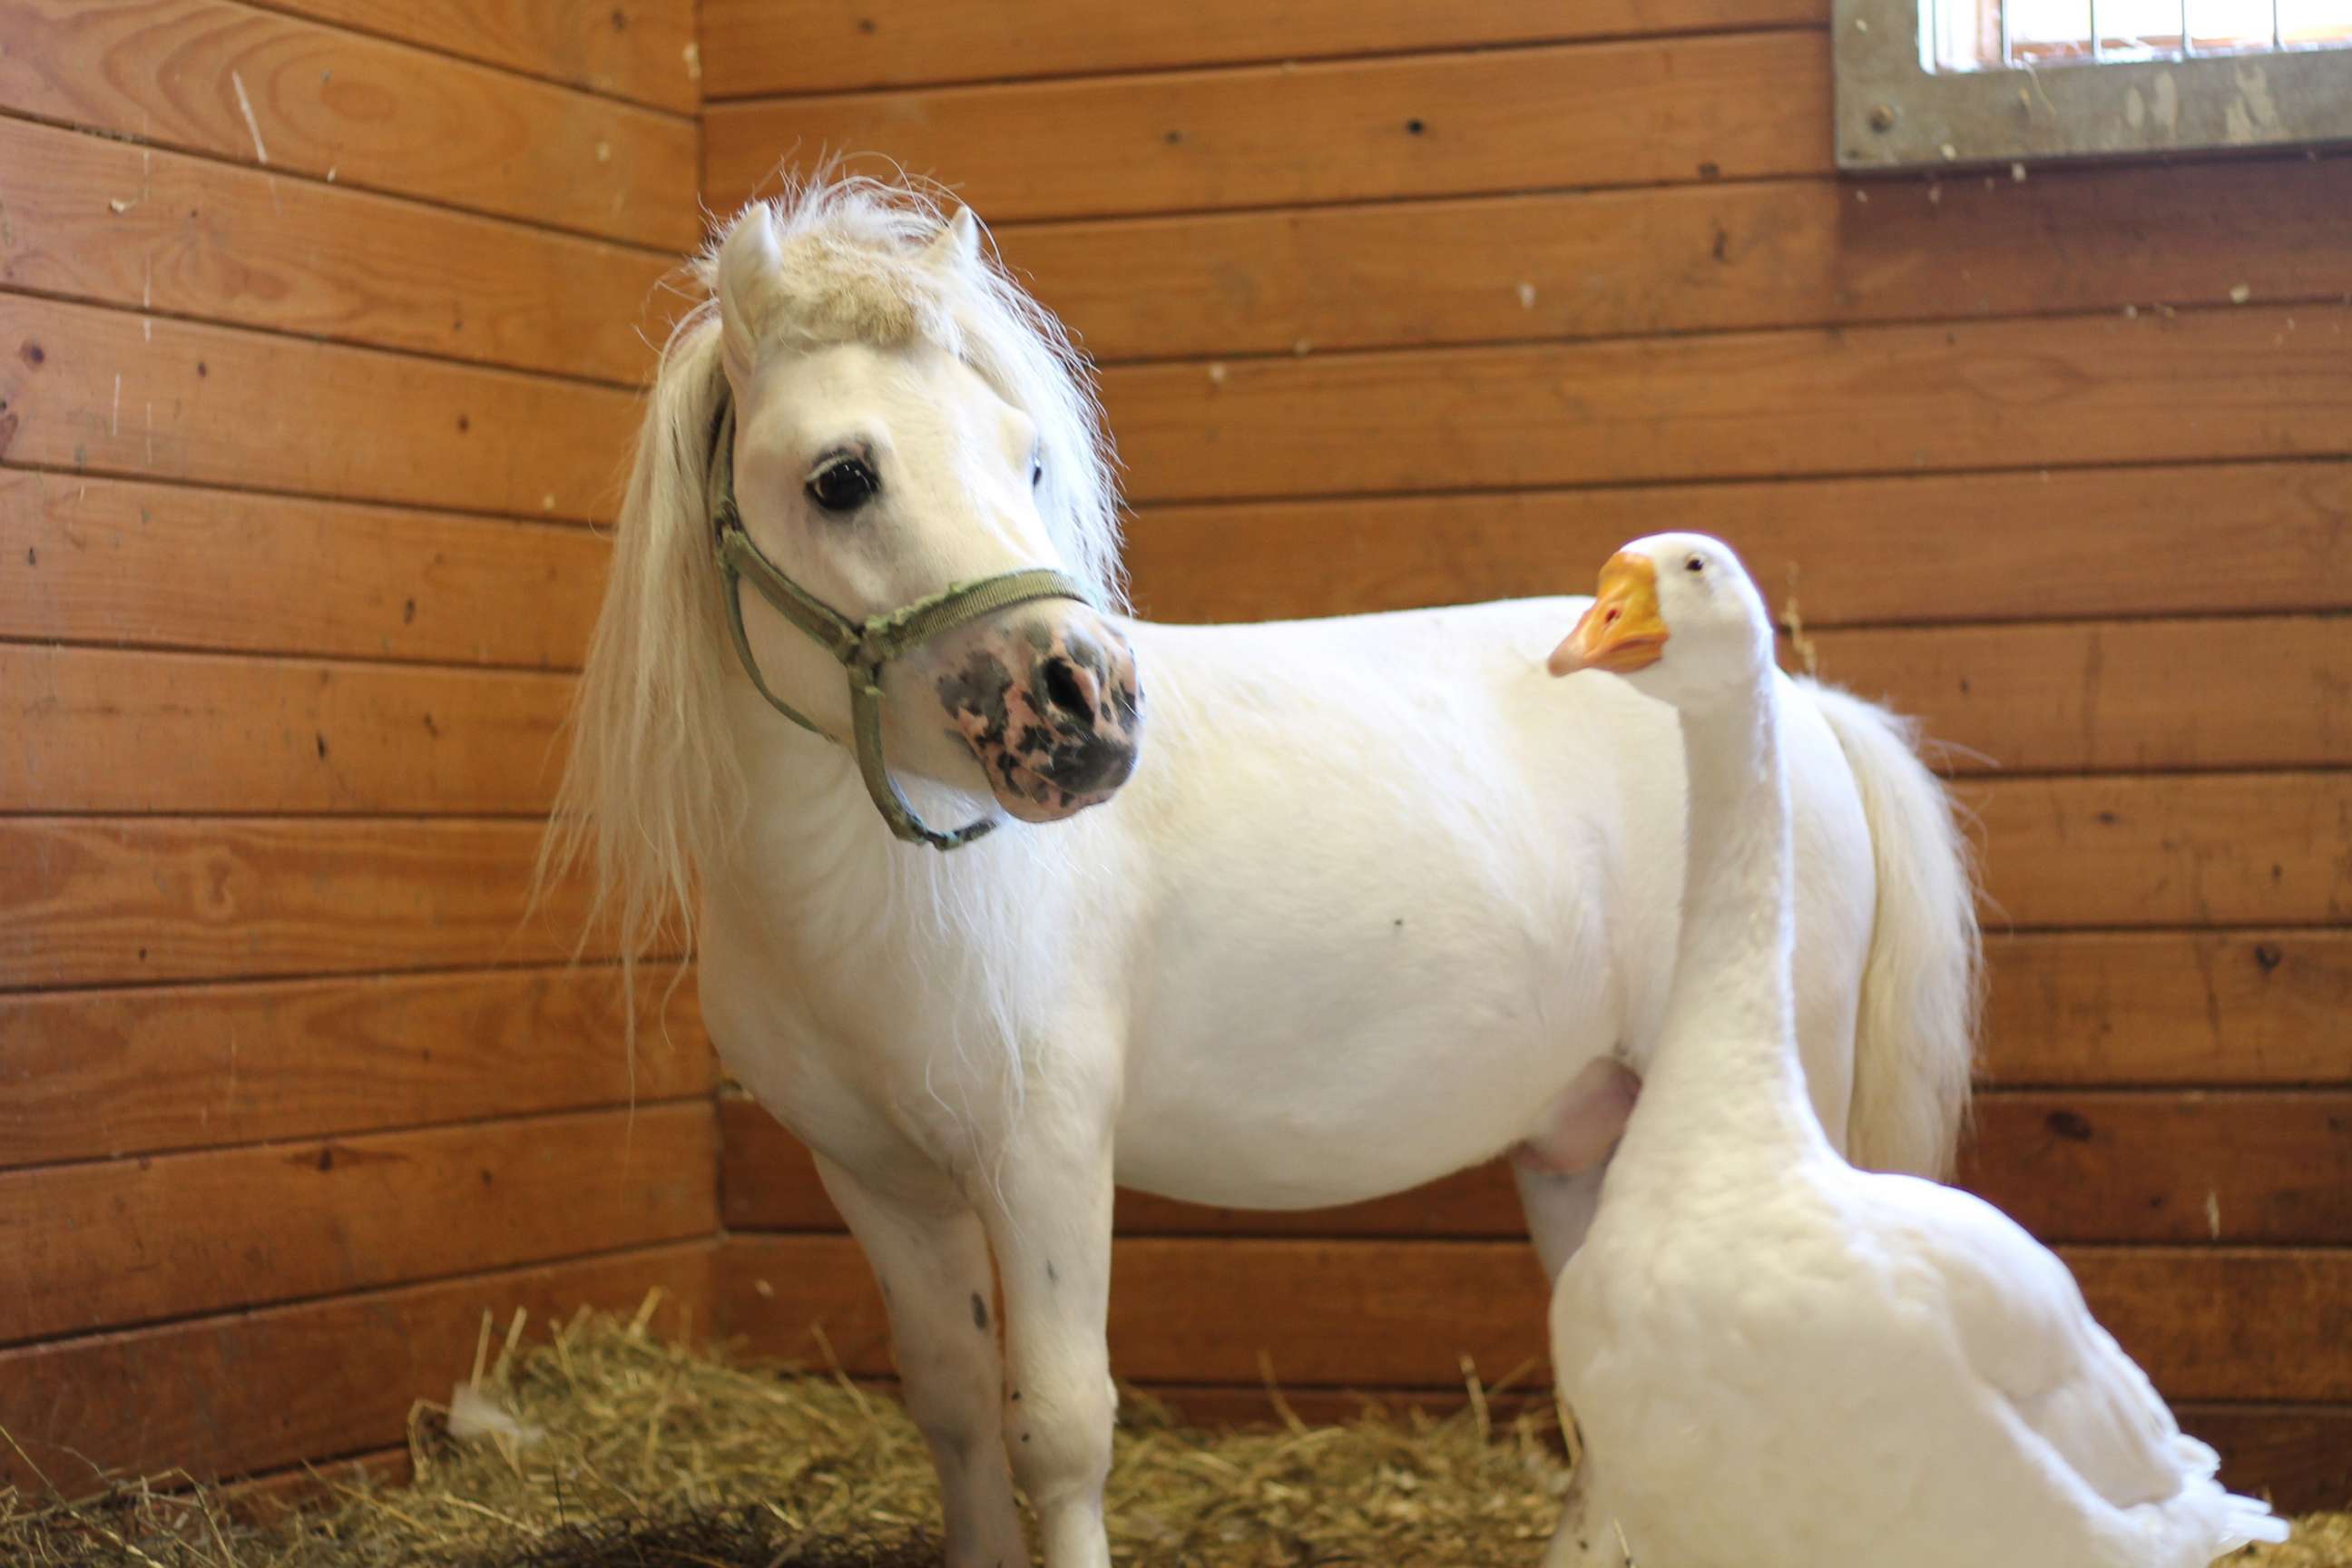 PHOTO: Waffles, a miniature horse, and Hemingway, a goose, are best friends who will be adopted together from the Bucks County SPCA in Bucks County, Pa.